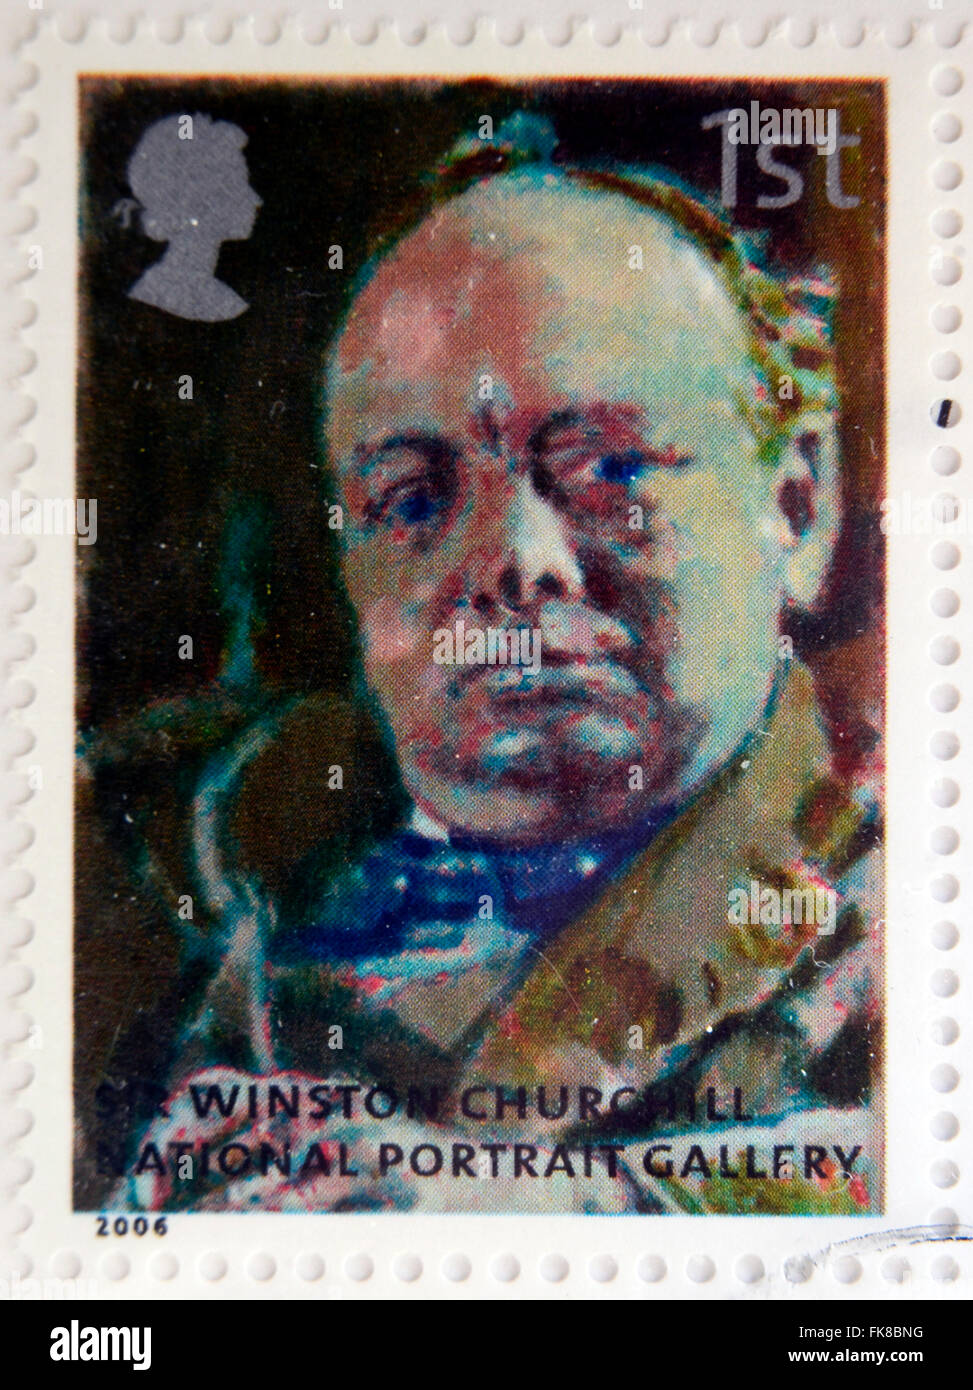 UNITED KINGDOM - CIRCA 2006: A stamp printed in Great Britain dedicated to the national portrait gallery, shows Winston Churchil Stock Photo